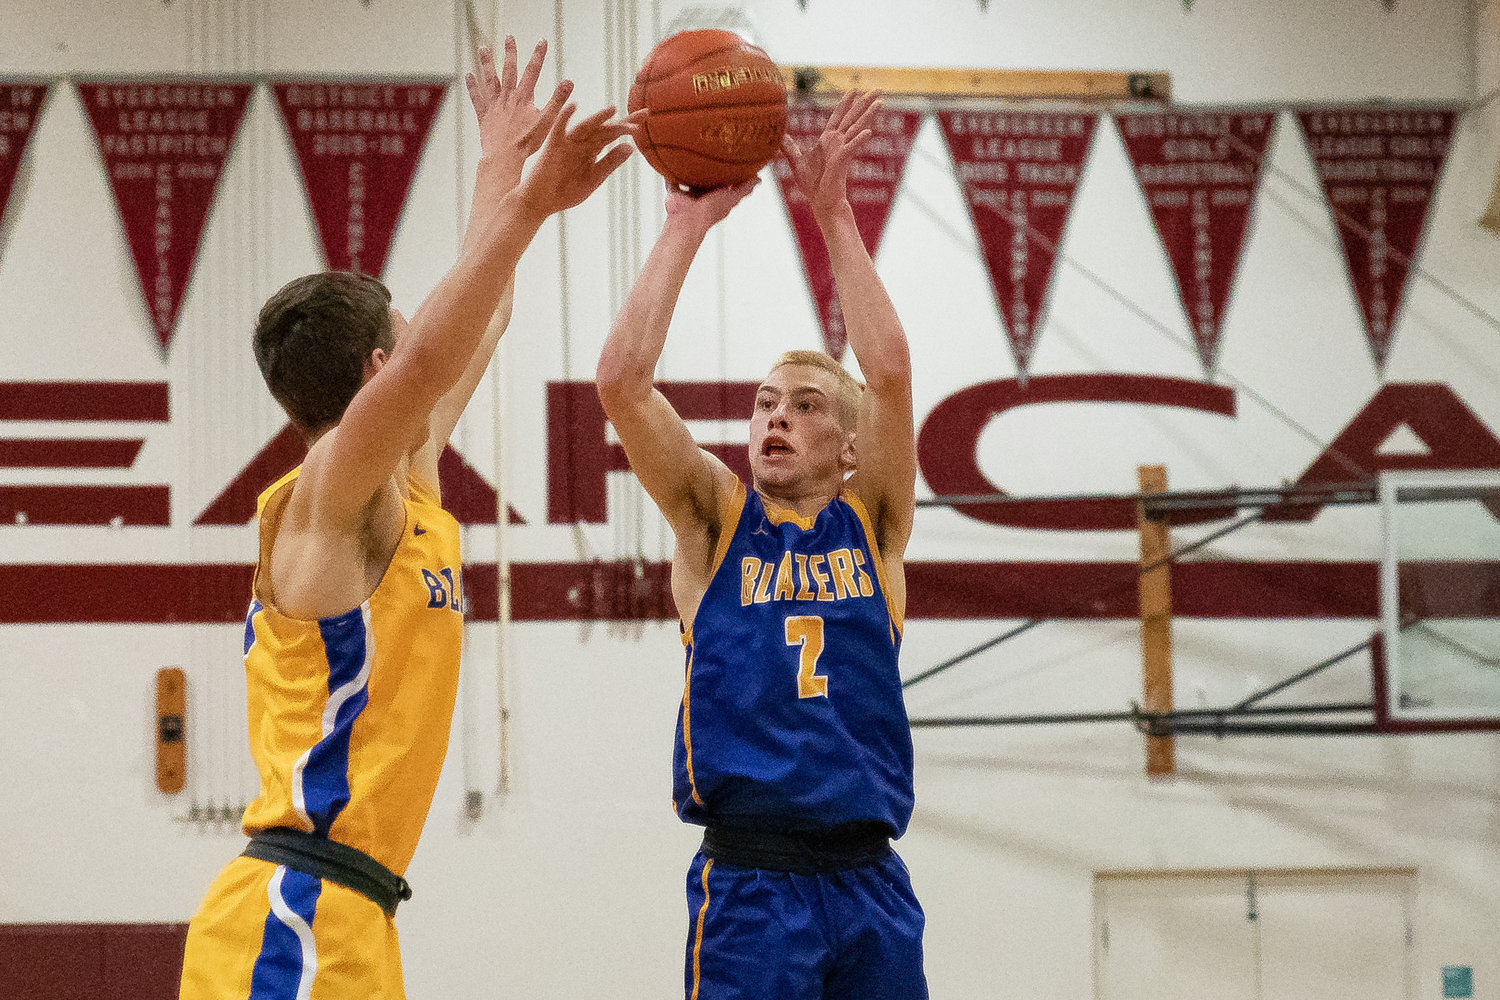 W.F. West guard Seth Hoff rises for a 3-pointer at the SWW Senior All-Star Game March 26 at W.F. West.